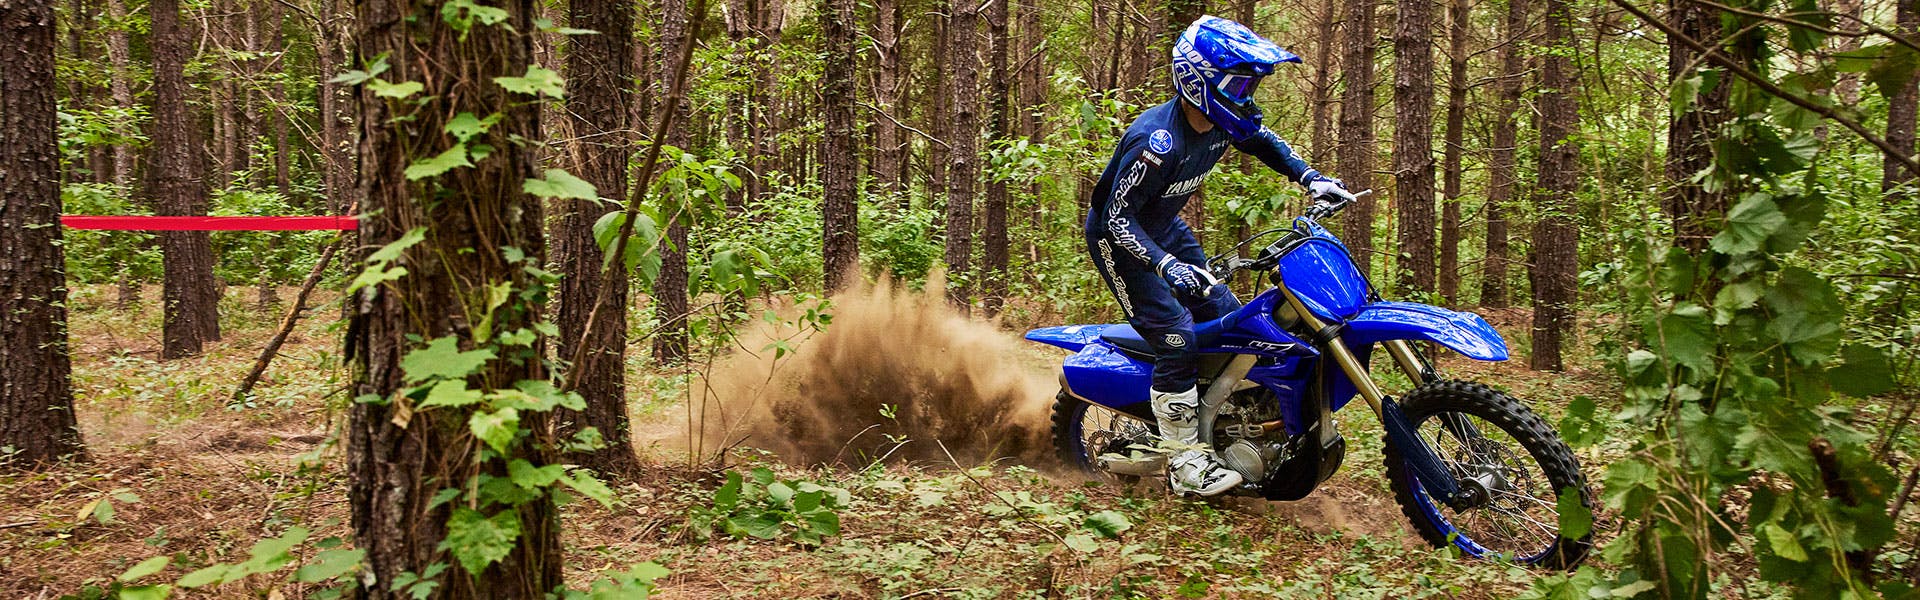 Yamaha YZ250FX in action on off road track